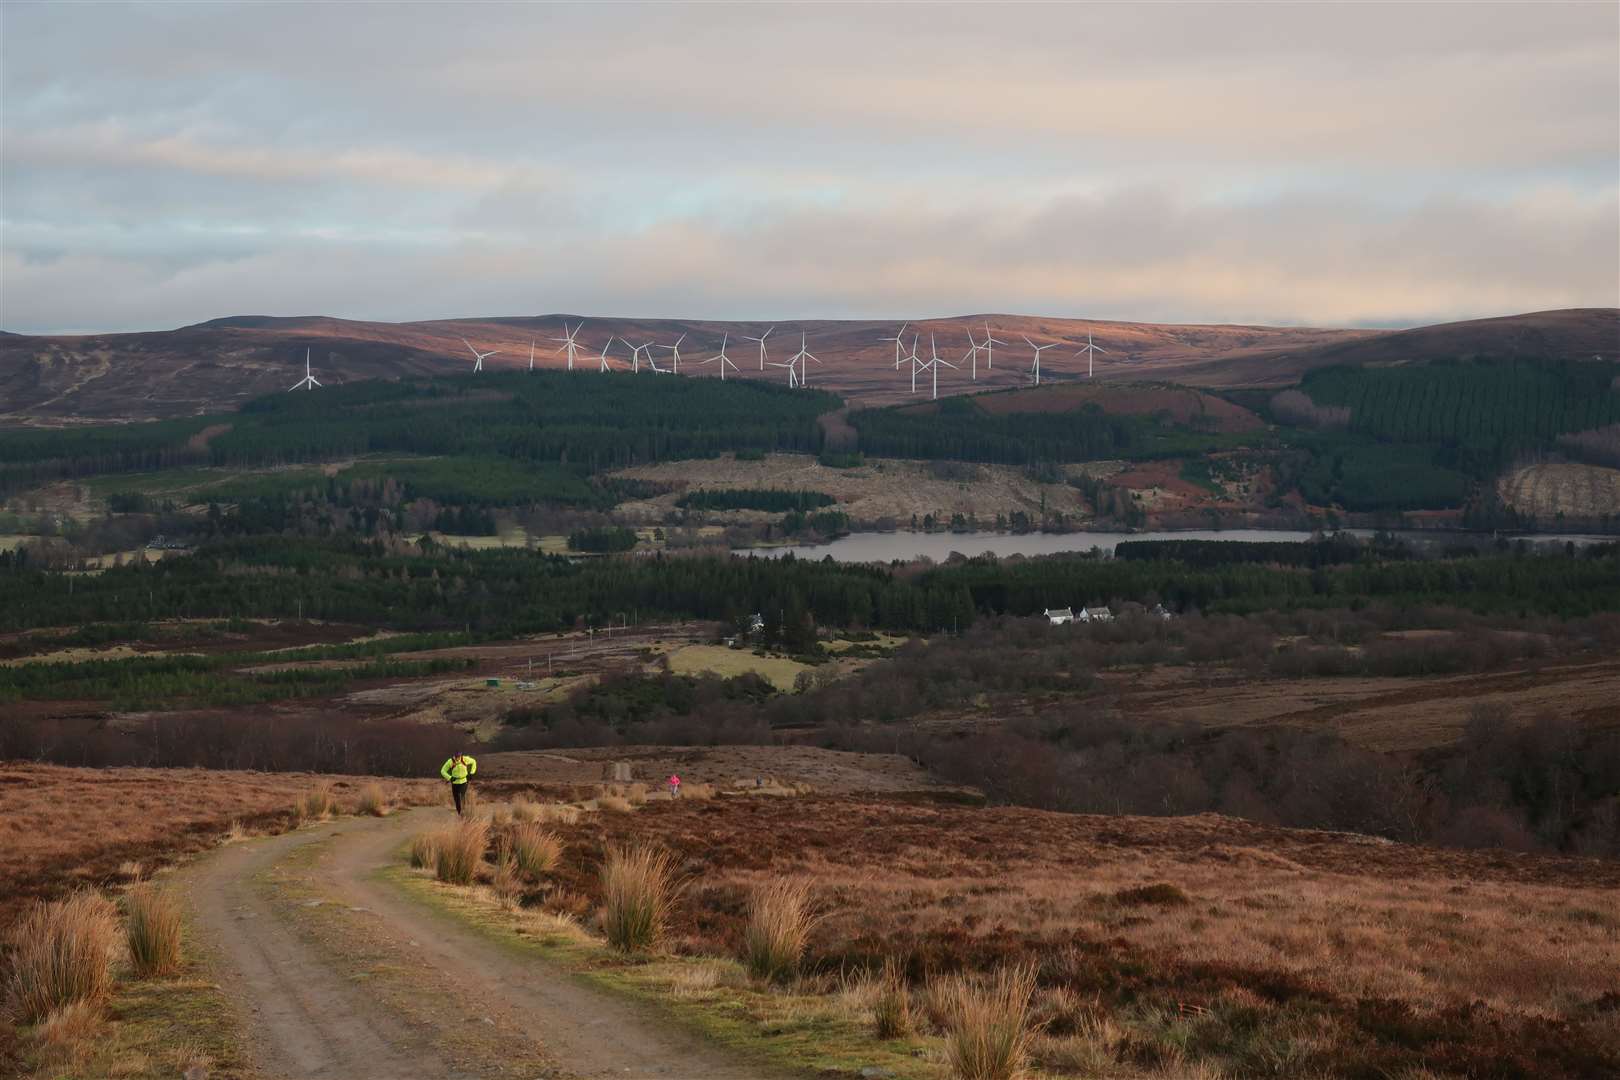 On the steep initial ascent overlooking Loch Moy and the Moy wind farm.